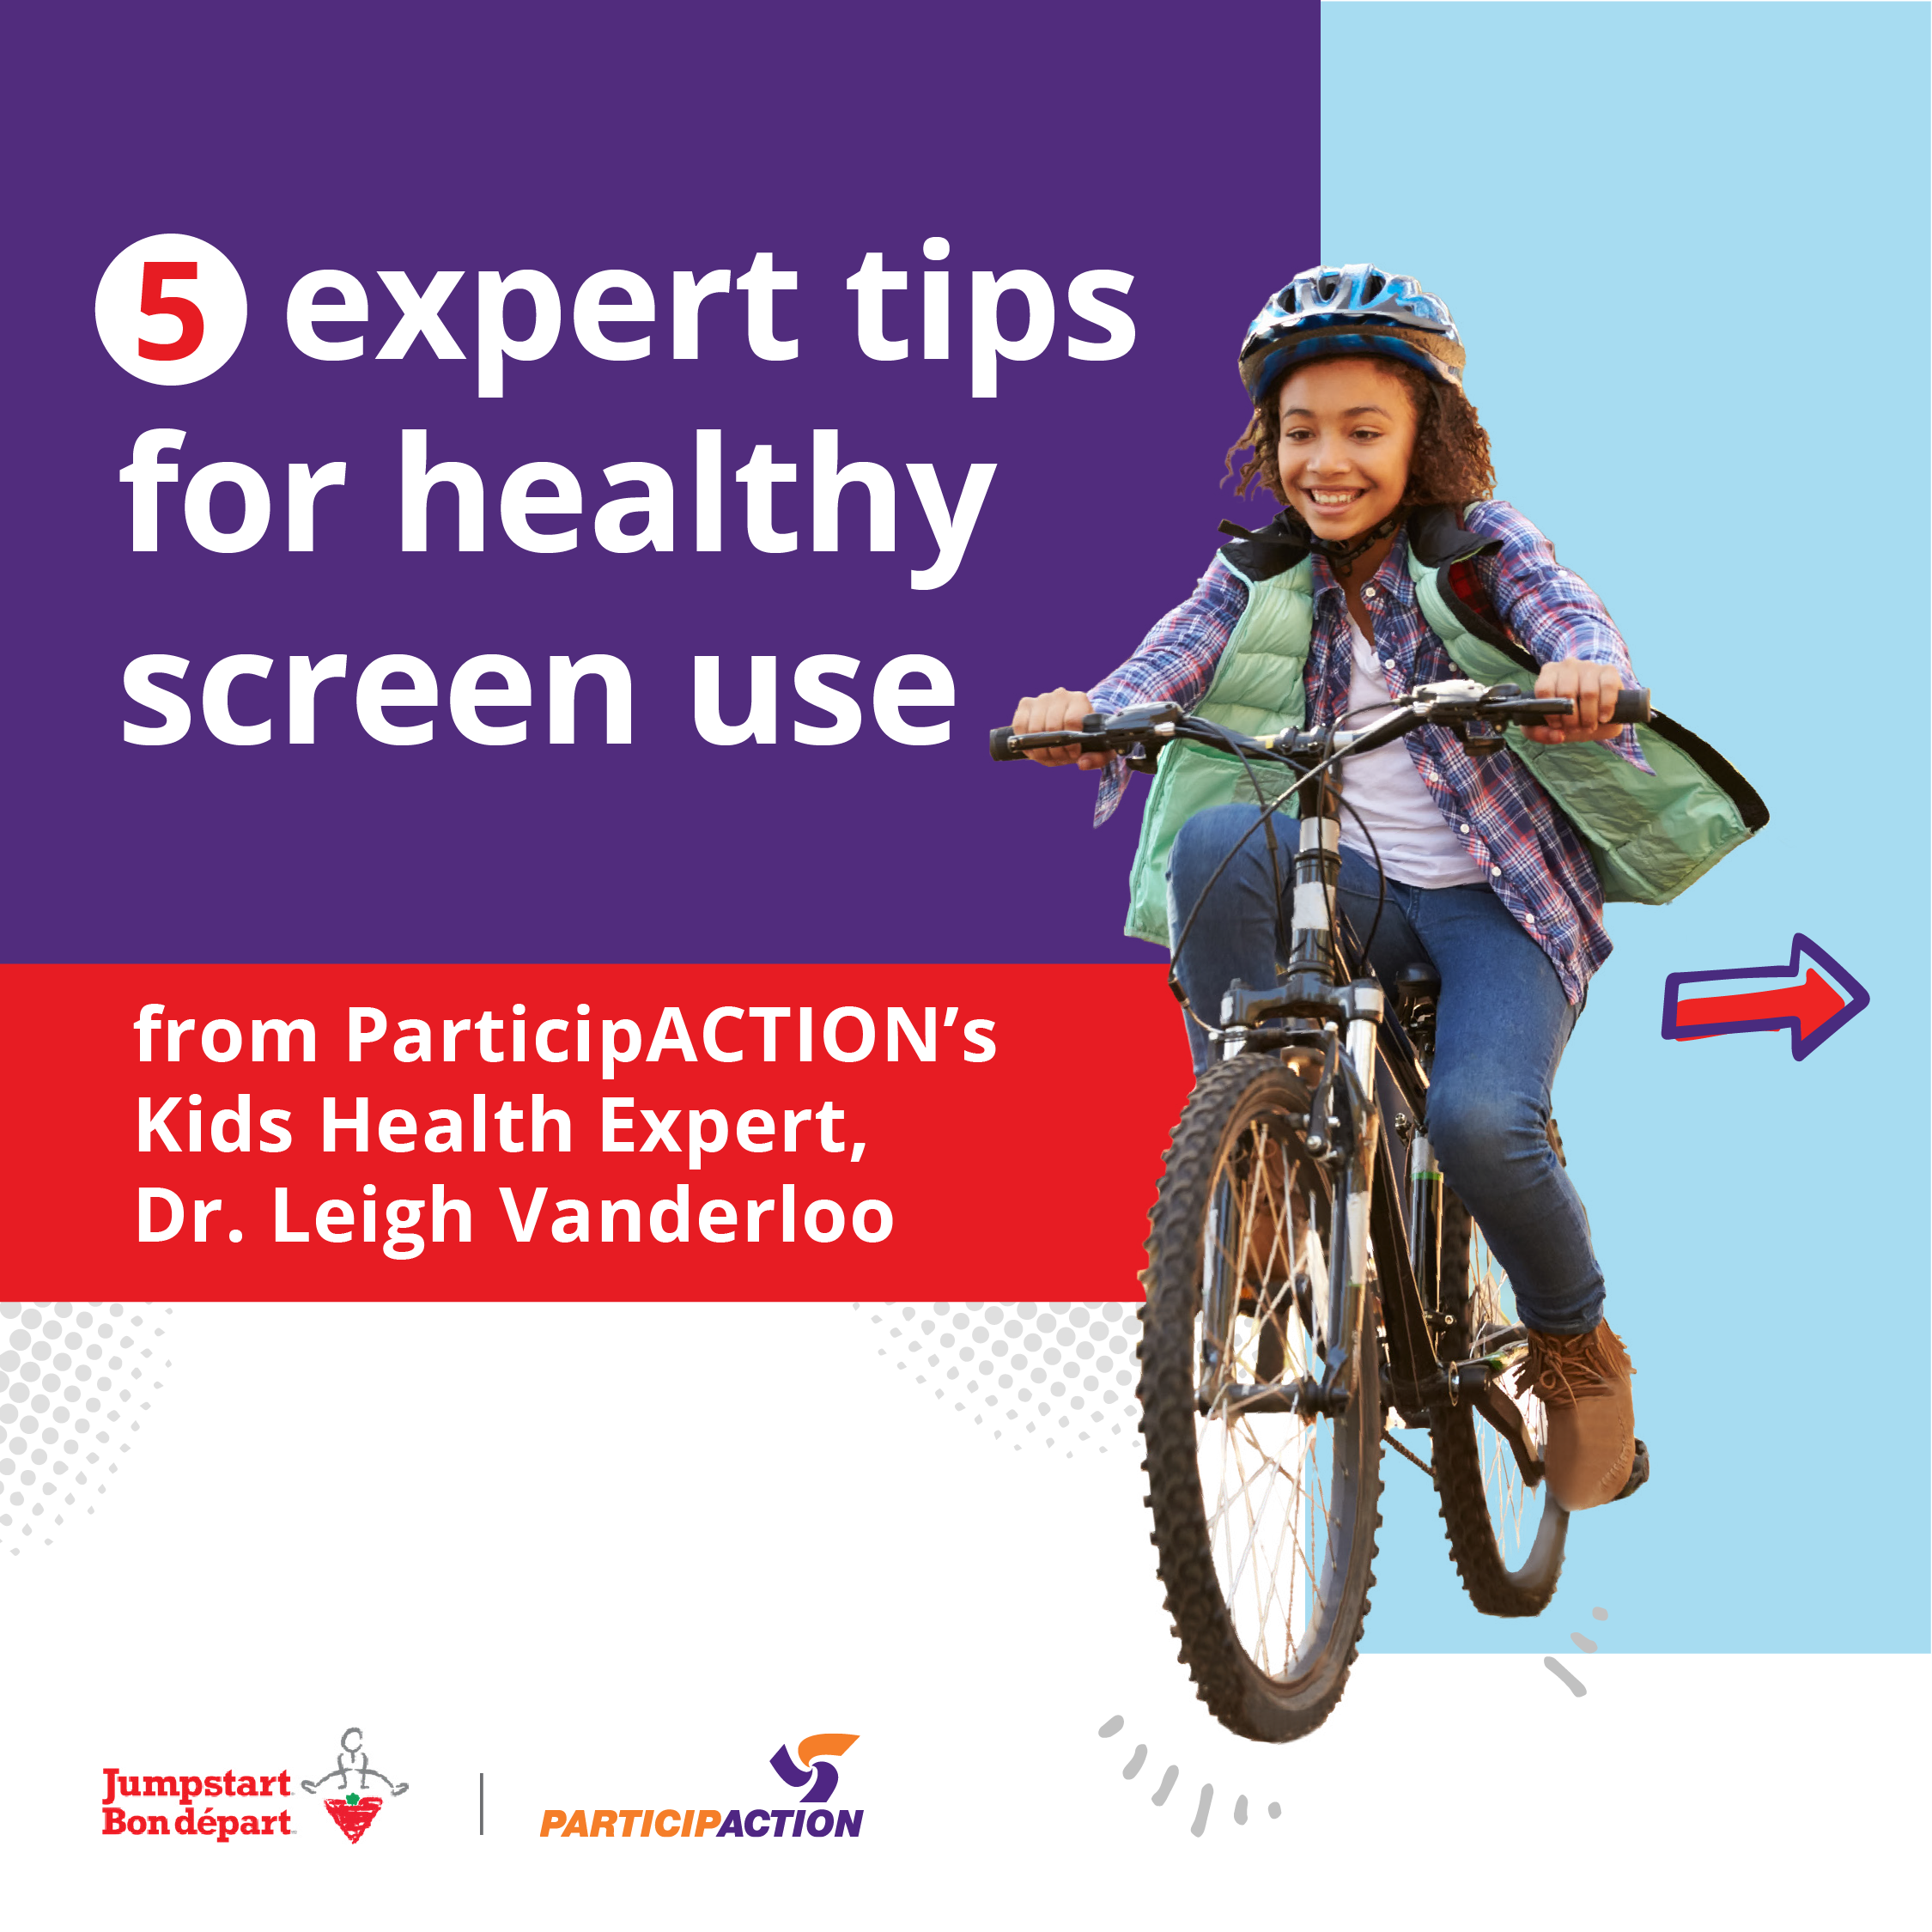 5 expert tips for healthy screen use from ParticipACTION's Kids Health Expert, Dr. Leigh Vanderloo. A girl rides a mountain bike. The Jumpstart and ParticipACTION logos are in the bottom-left corner.